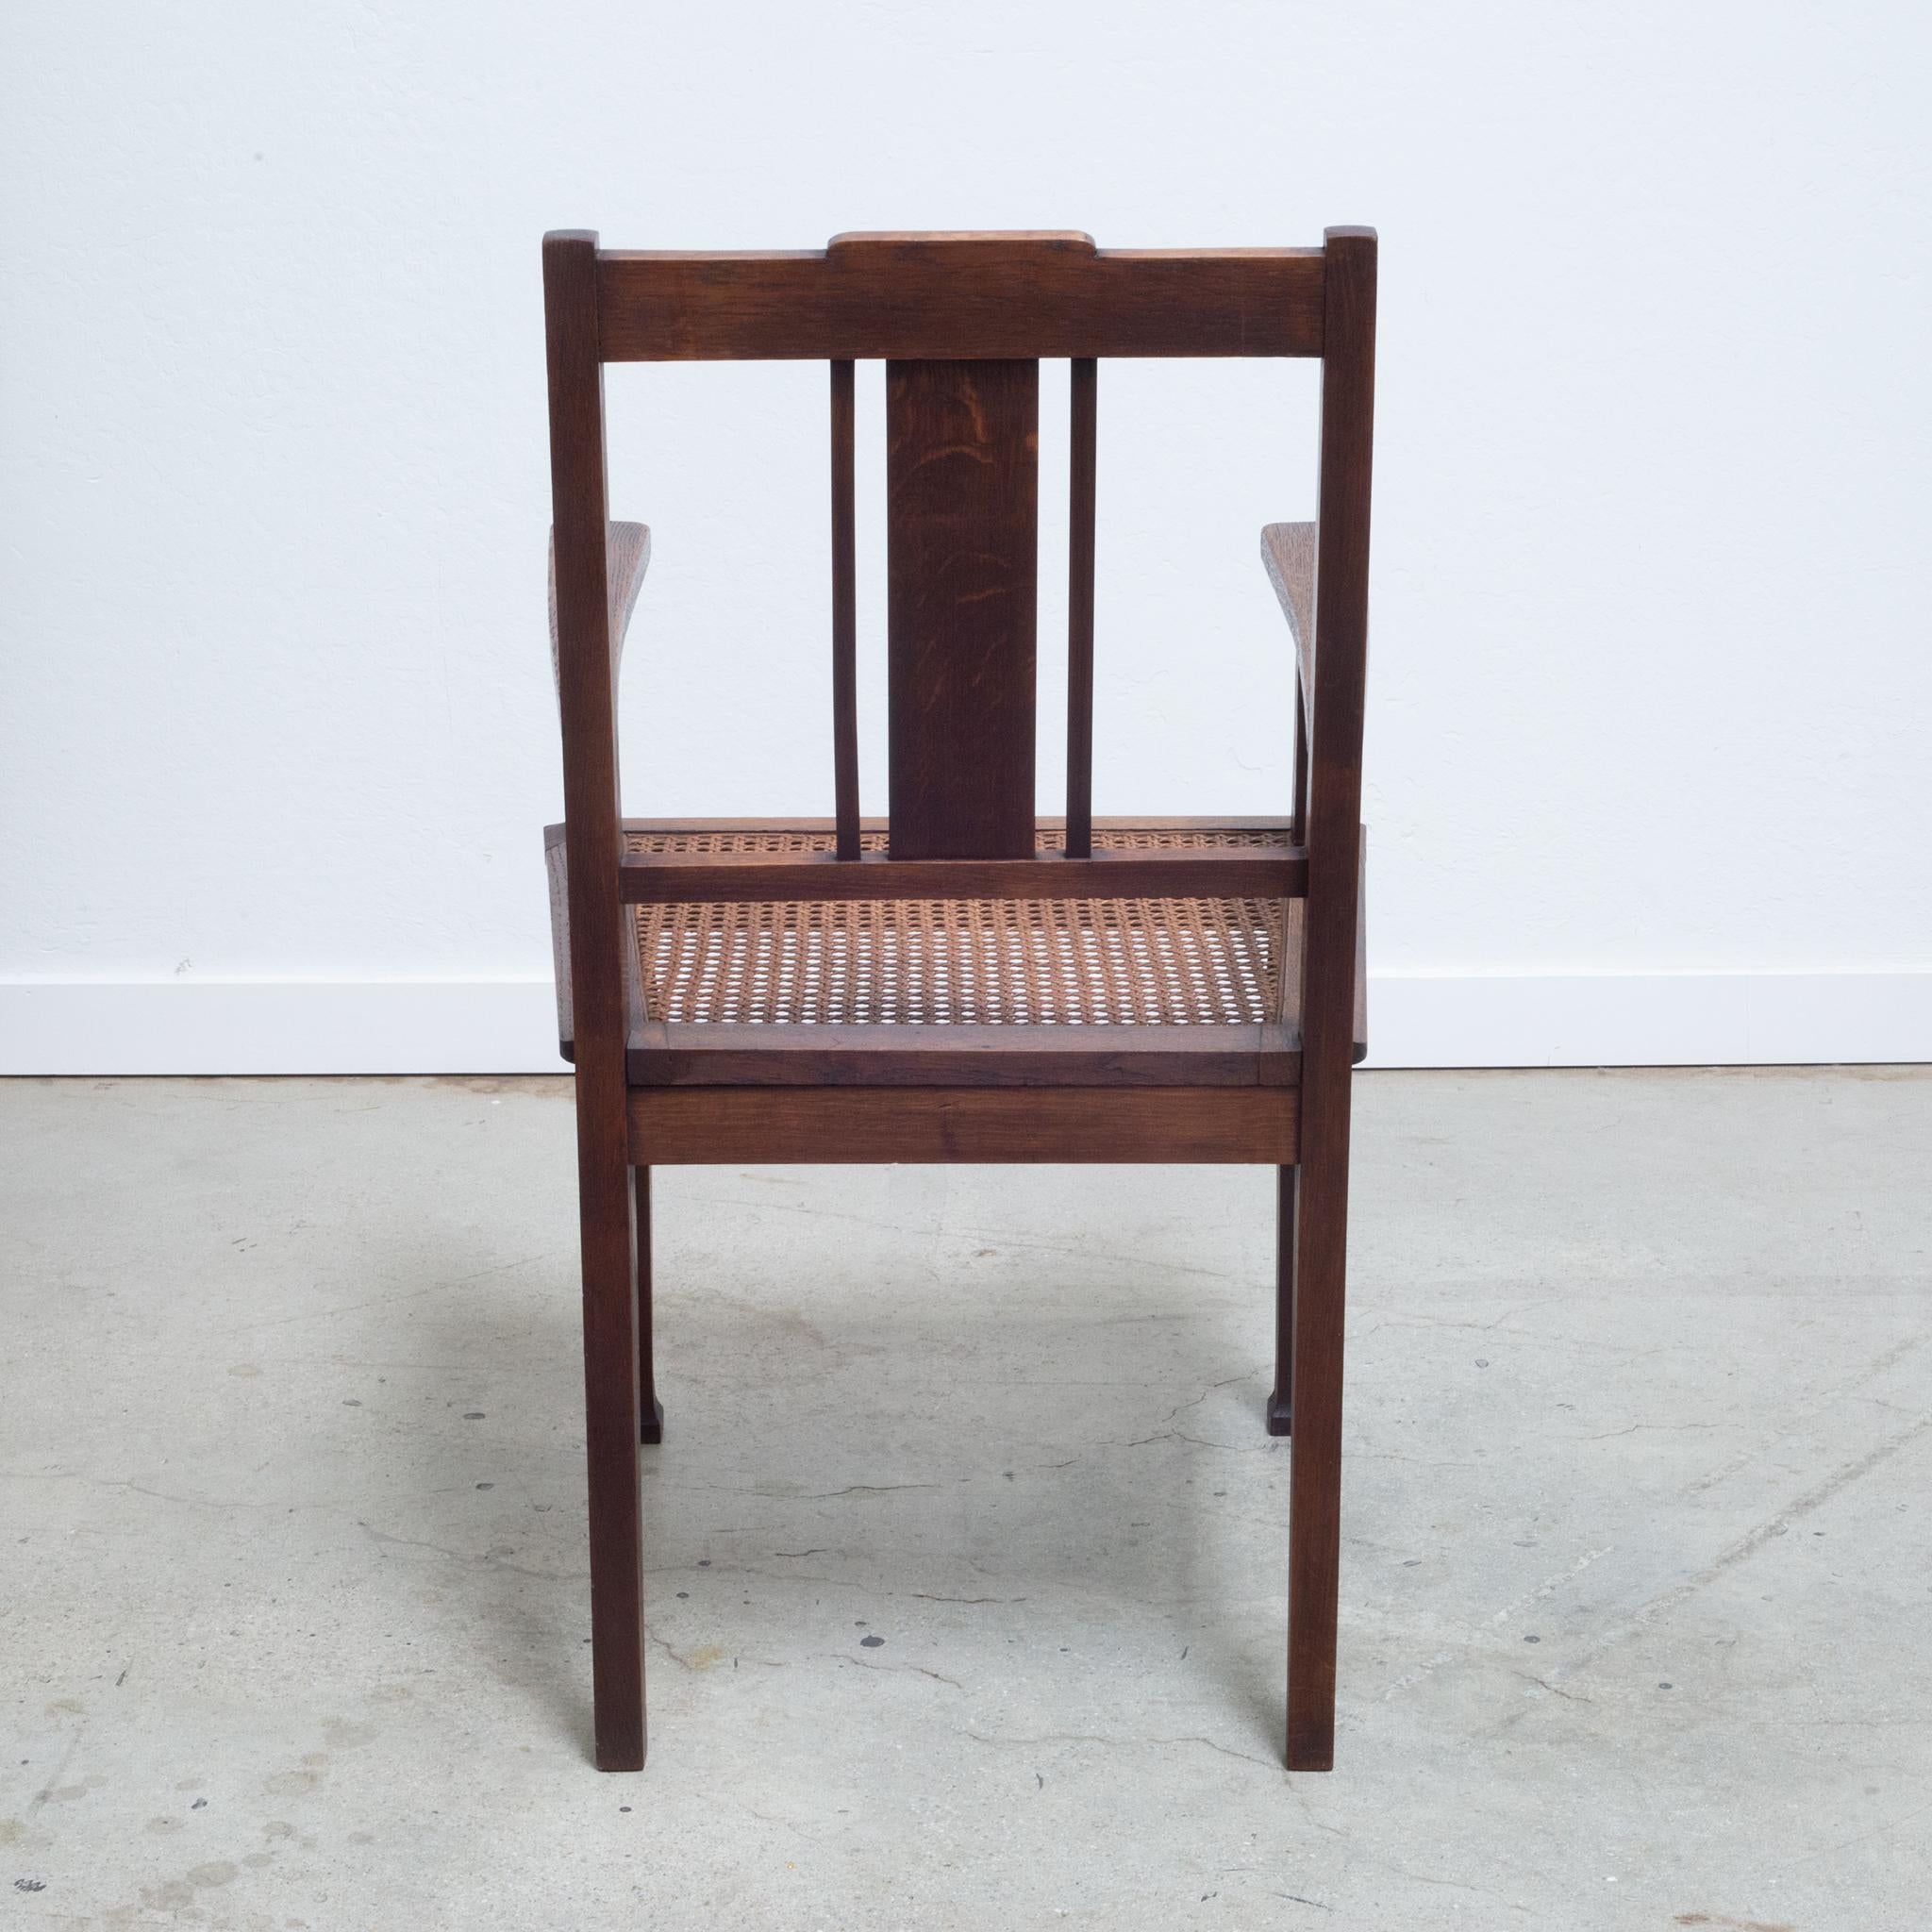 English Early 20th C. Glasgow Style Arts and Crafts Caned Oak Arm Chair, c.1900 For Sale